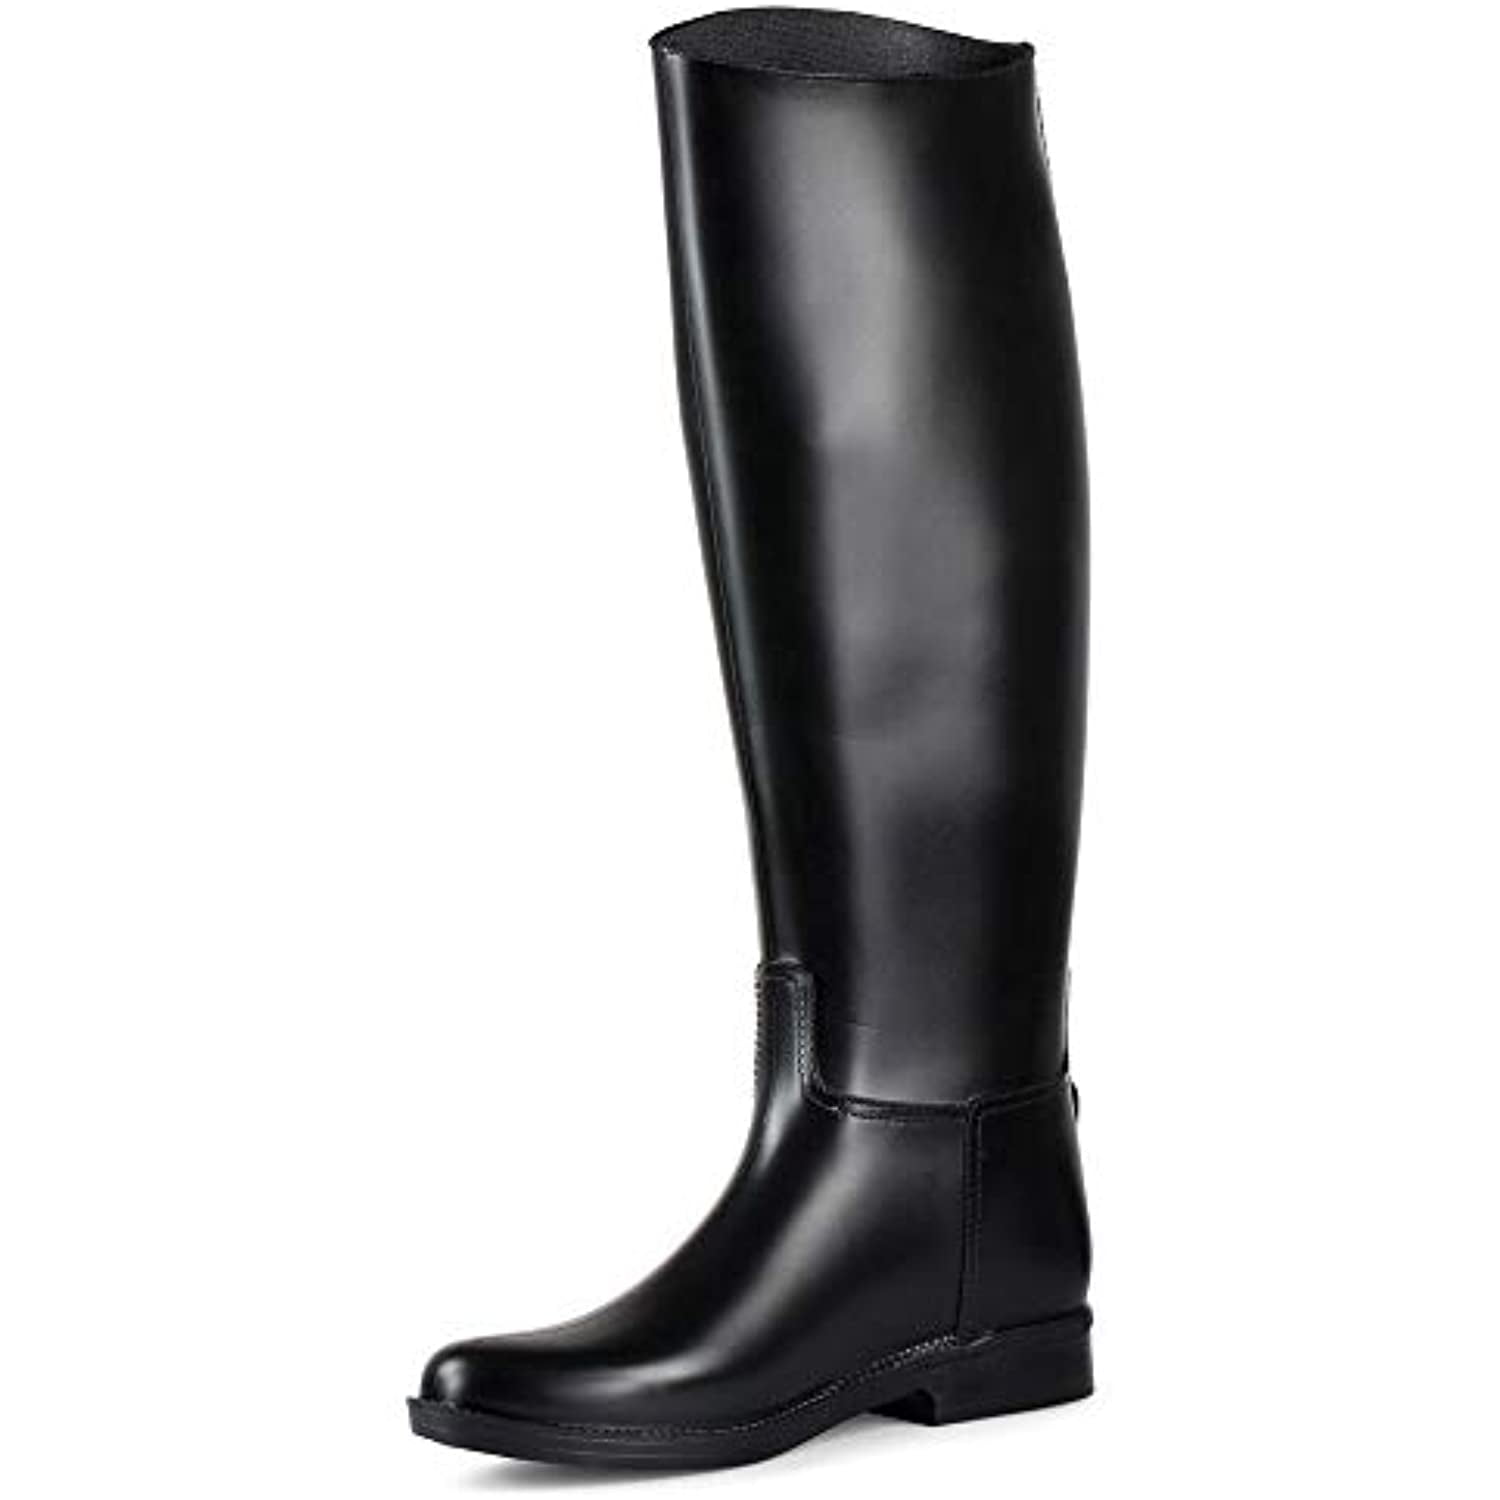 Childs & Adult sizes Horze chester horse riding long/tall boots black rubber